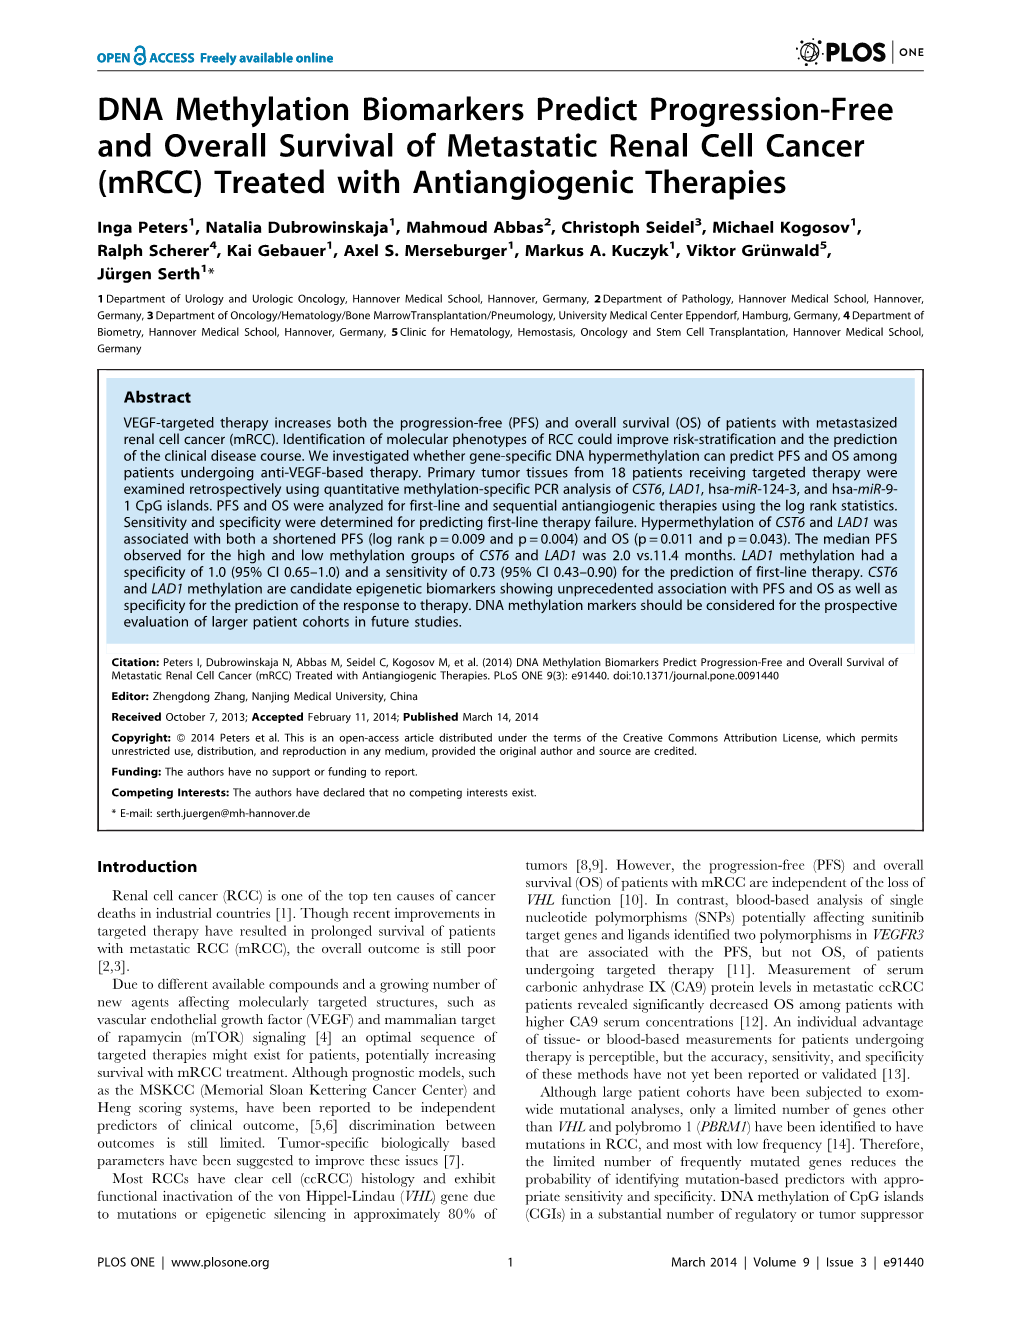 DNA Methylation Biomarkers Predict Progression-Free and Overall Survival of Metastatic Renal Cell Cancer (Mrcc) Treated with Antiangiogenic Therapies